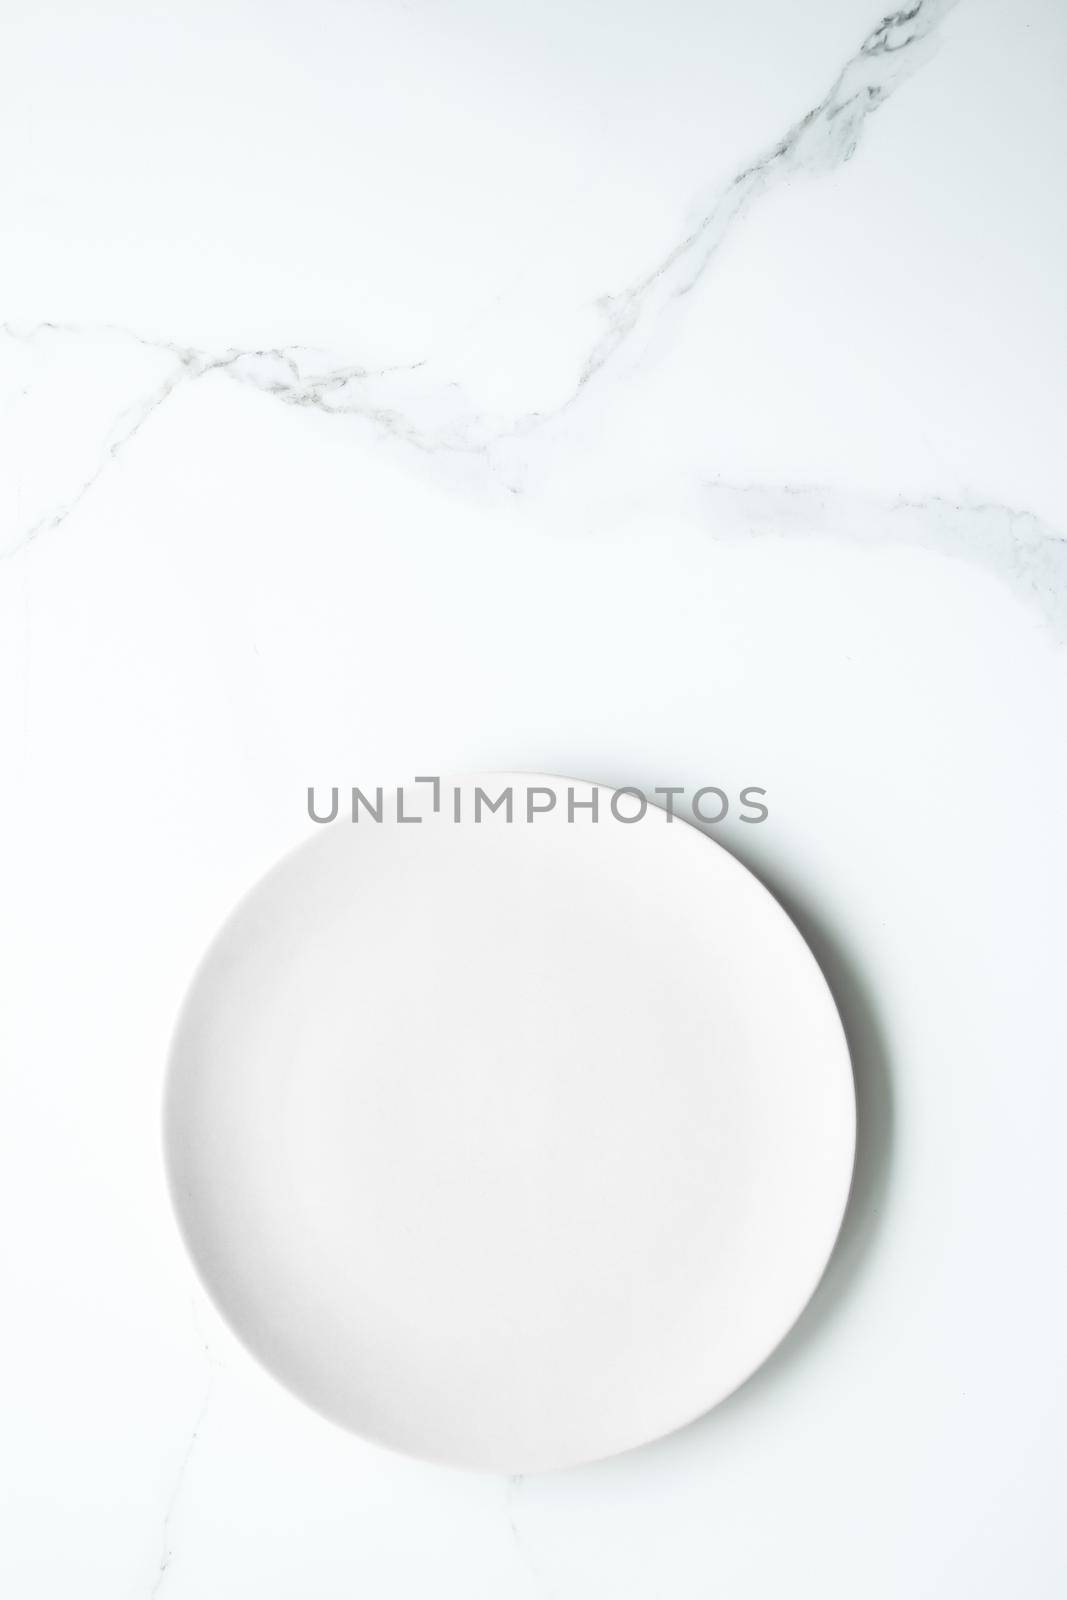 White empty plate on marble, flatlay - stylish tableware, romantic table decor and food menu concept. Serve the perfect dish